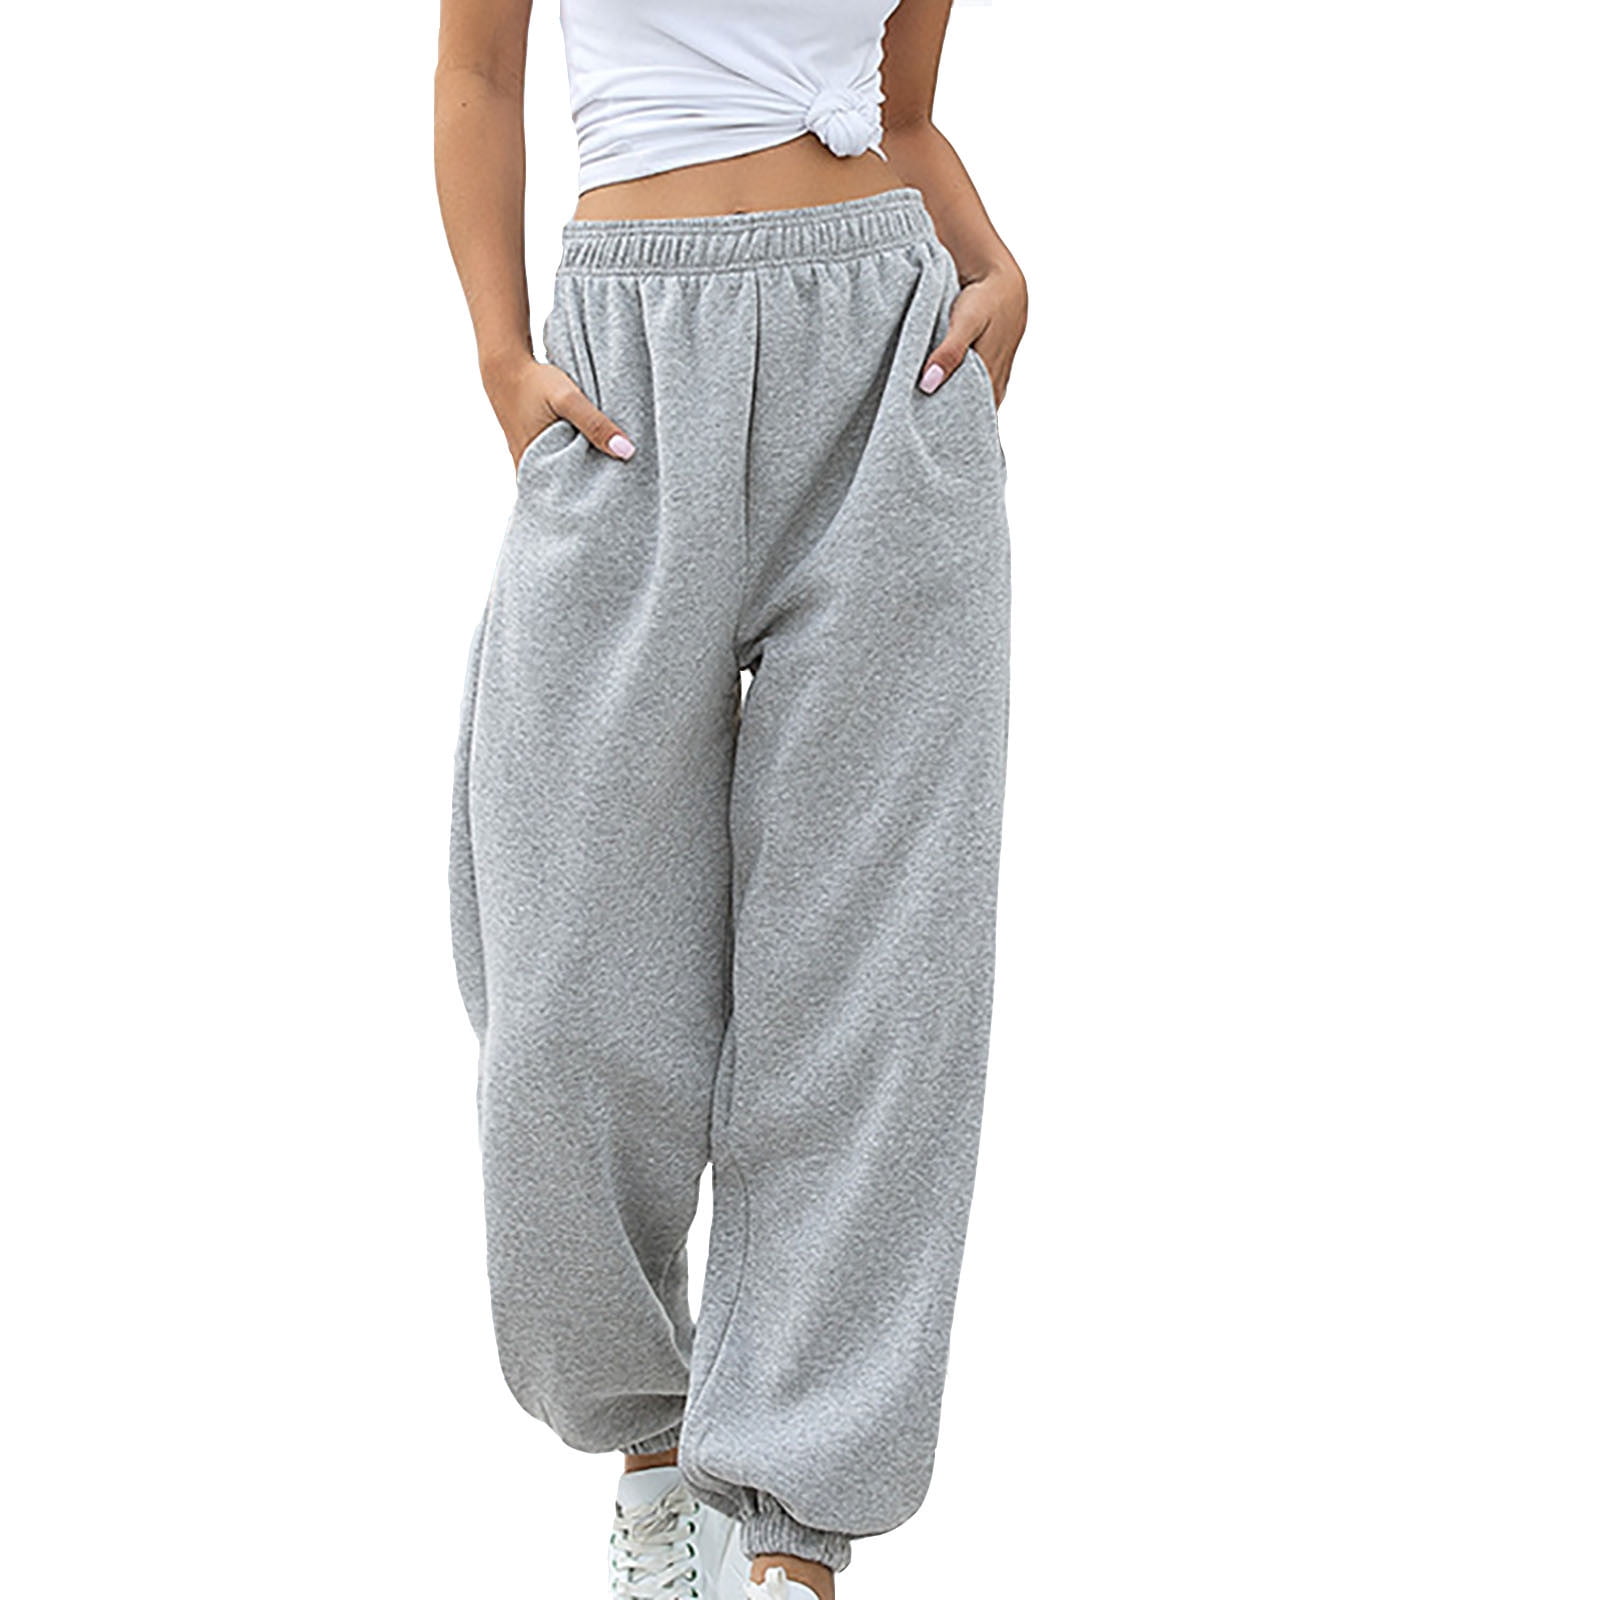  Holiday Price Reductions Trousers Pants for Women with Designs  Preppy Up Casual Pants Plus Size Sweaterpants Free People Cardigan Dupe  Grey : Sports & Outdoors